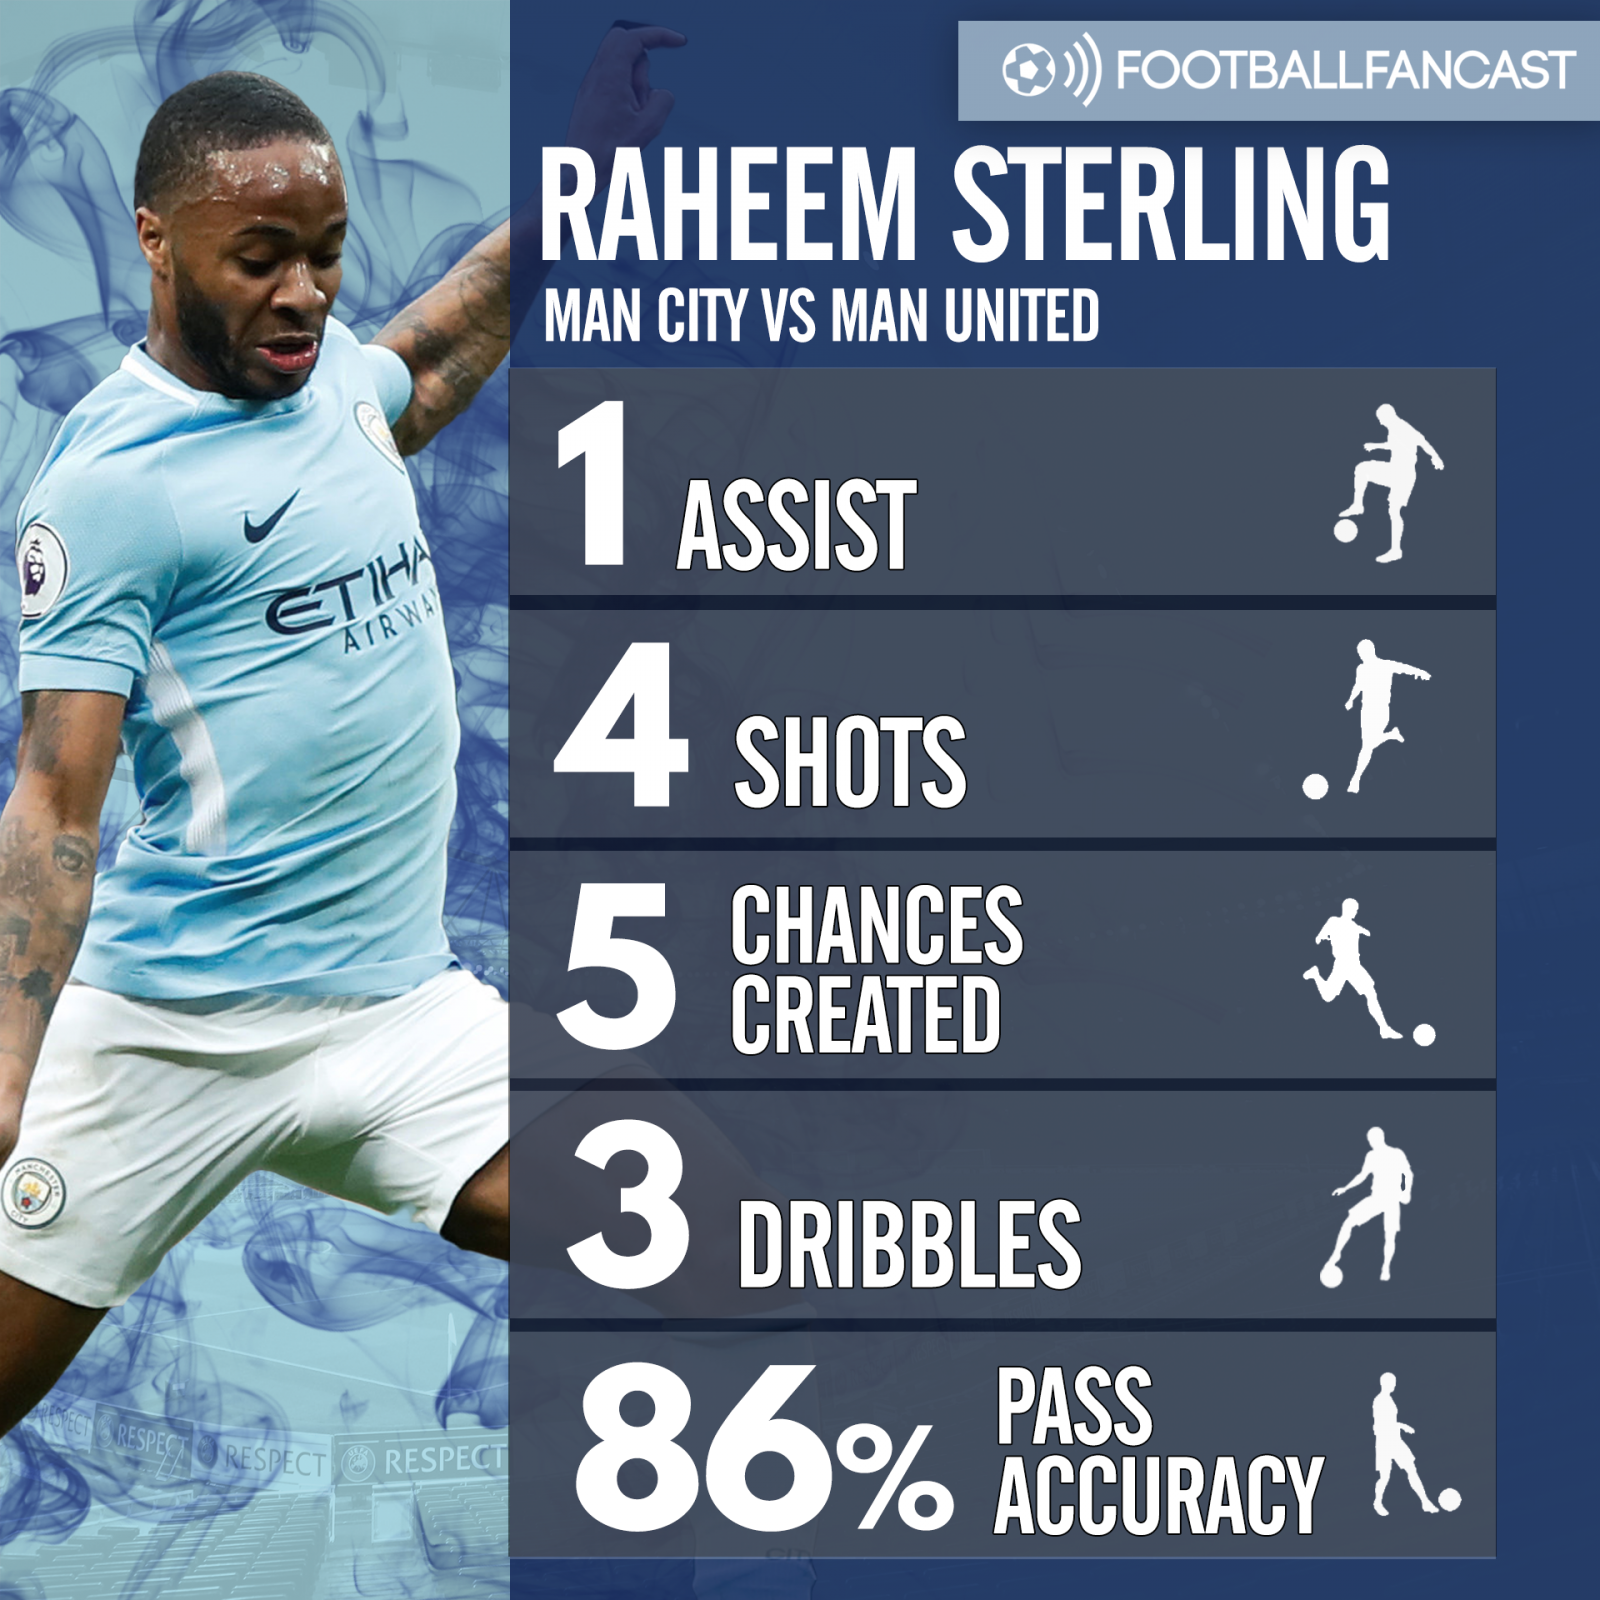 Raheem Sterling's stats from Man City's 3-2 defeat to Man United